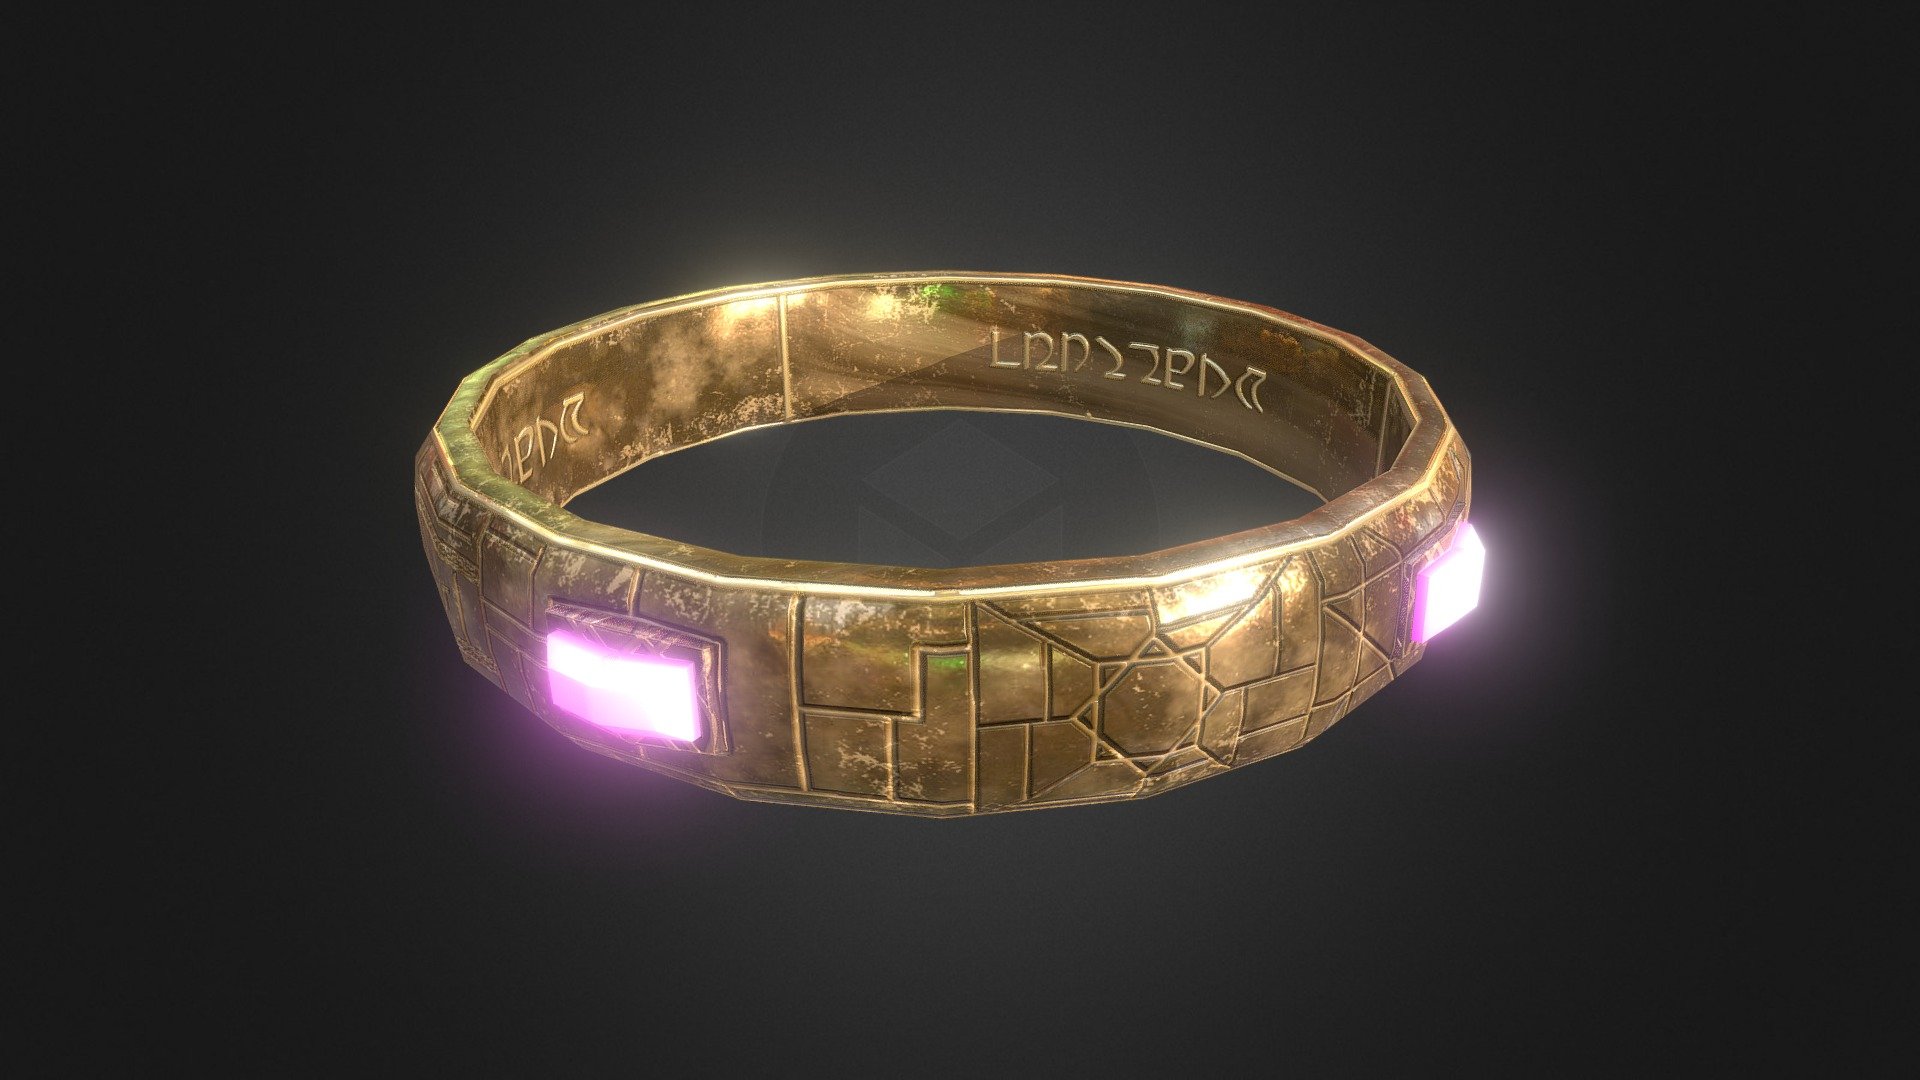 A lord of the ring inspired ring second version more ring like - Fantasy Ri...